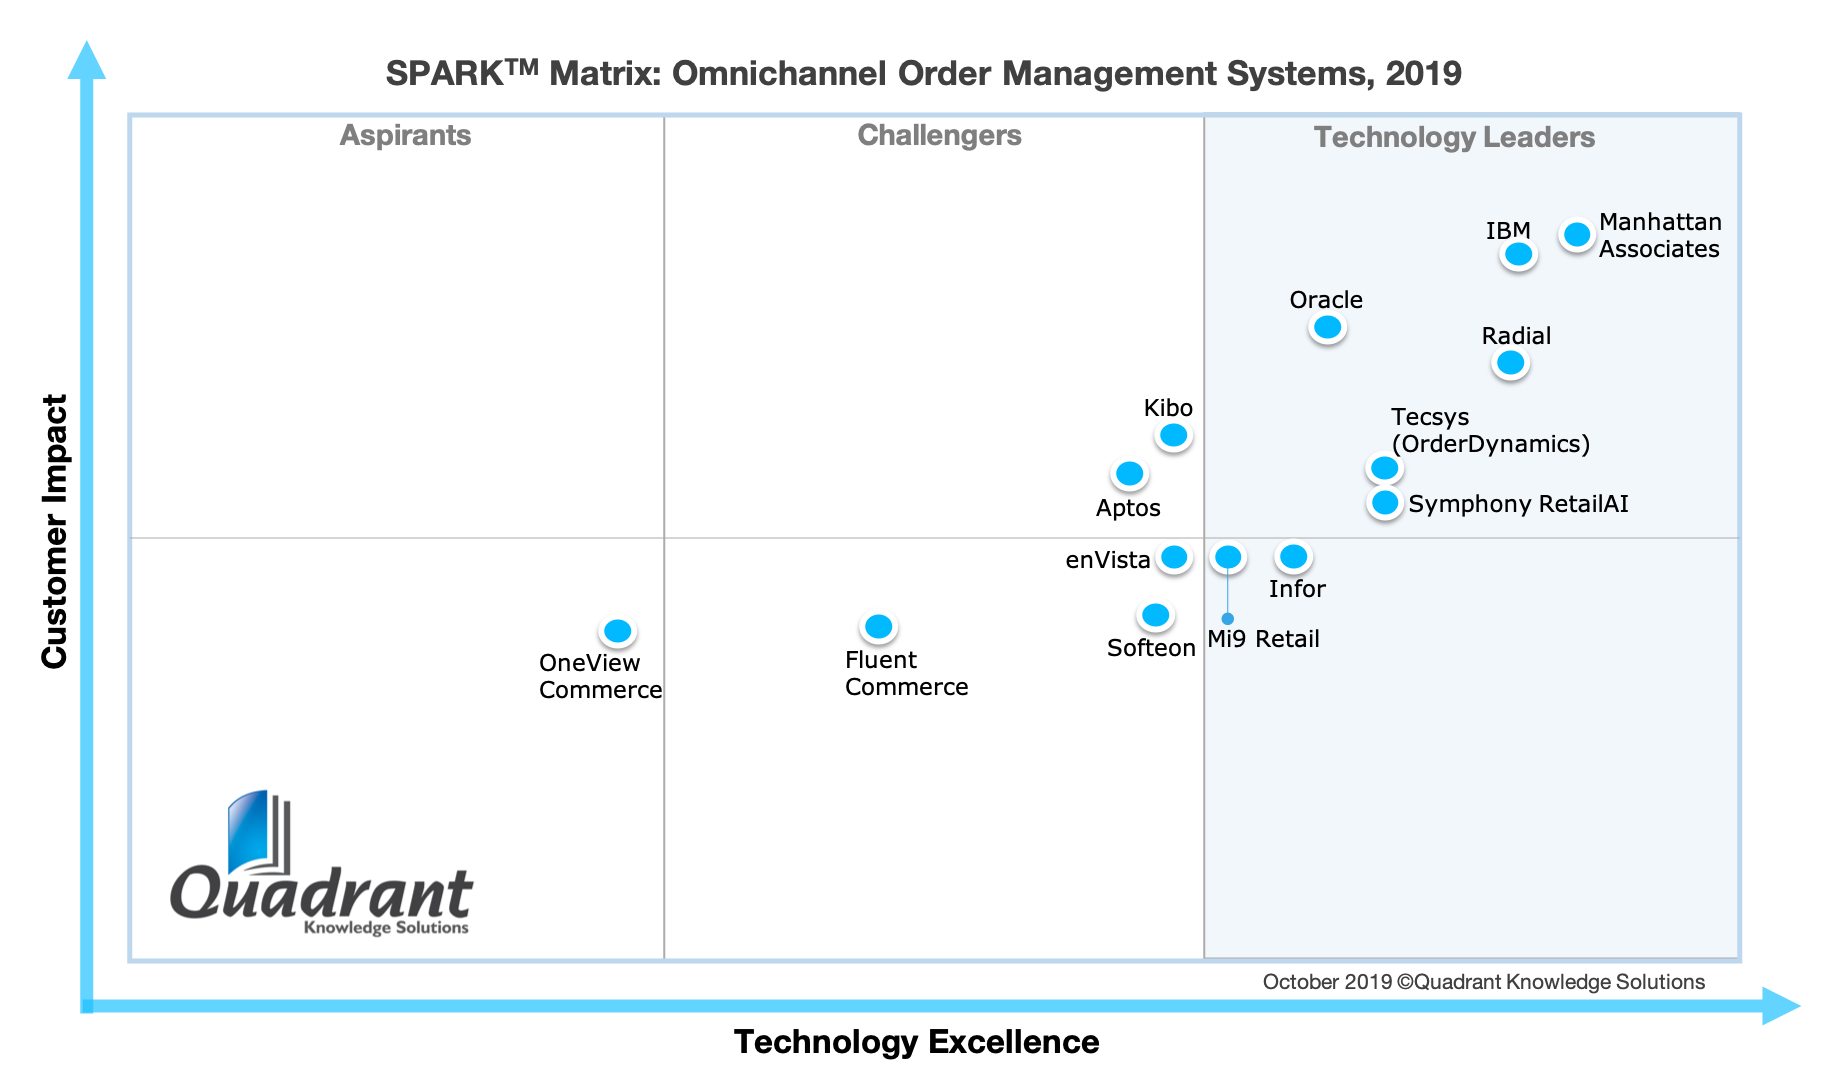 2019 SPARK Matrix of Omnichannel Order Management Systems OMS by Quadrant Knowledge Solutions Symphony RetailAI